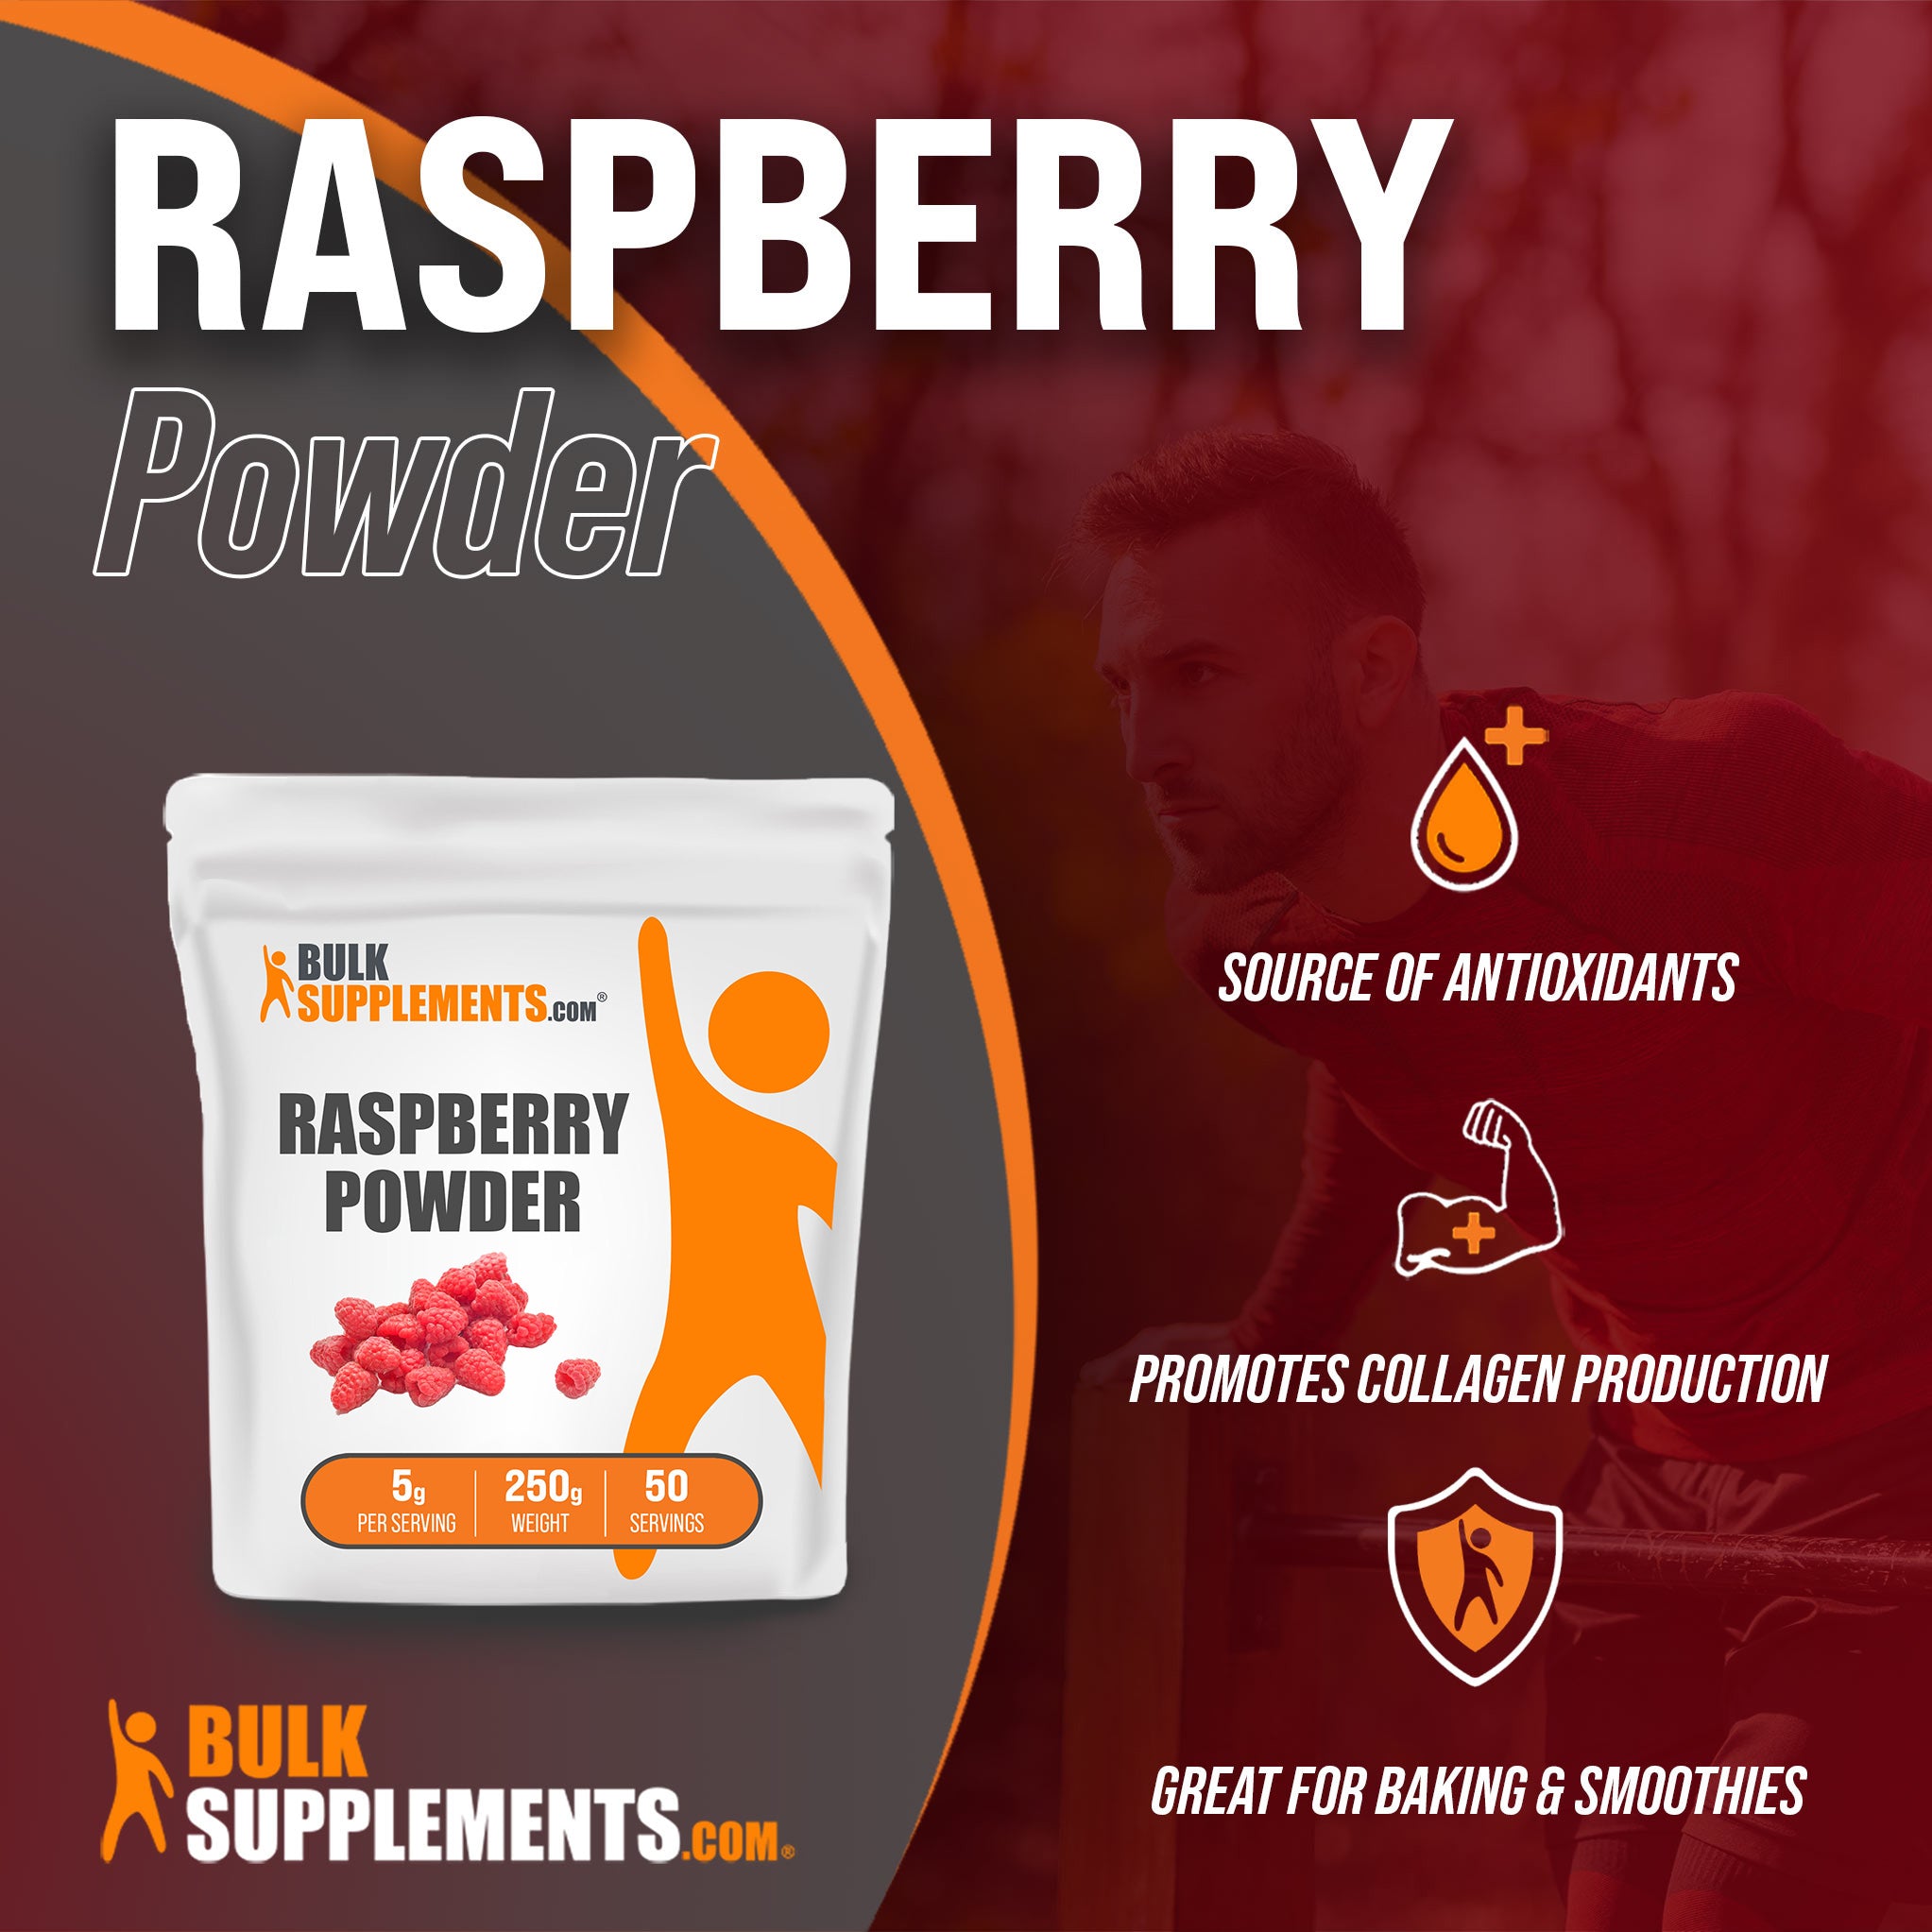 Benefits of Raspberry Powder: source of antioxidants, promotes collagen production, great for baking and smoothies